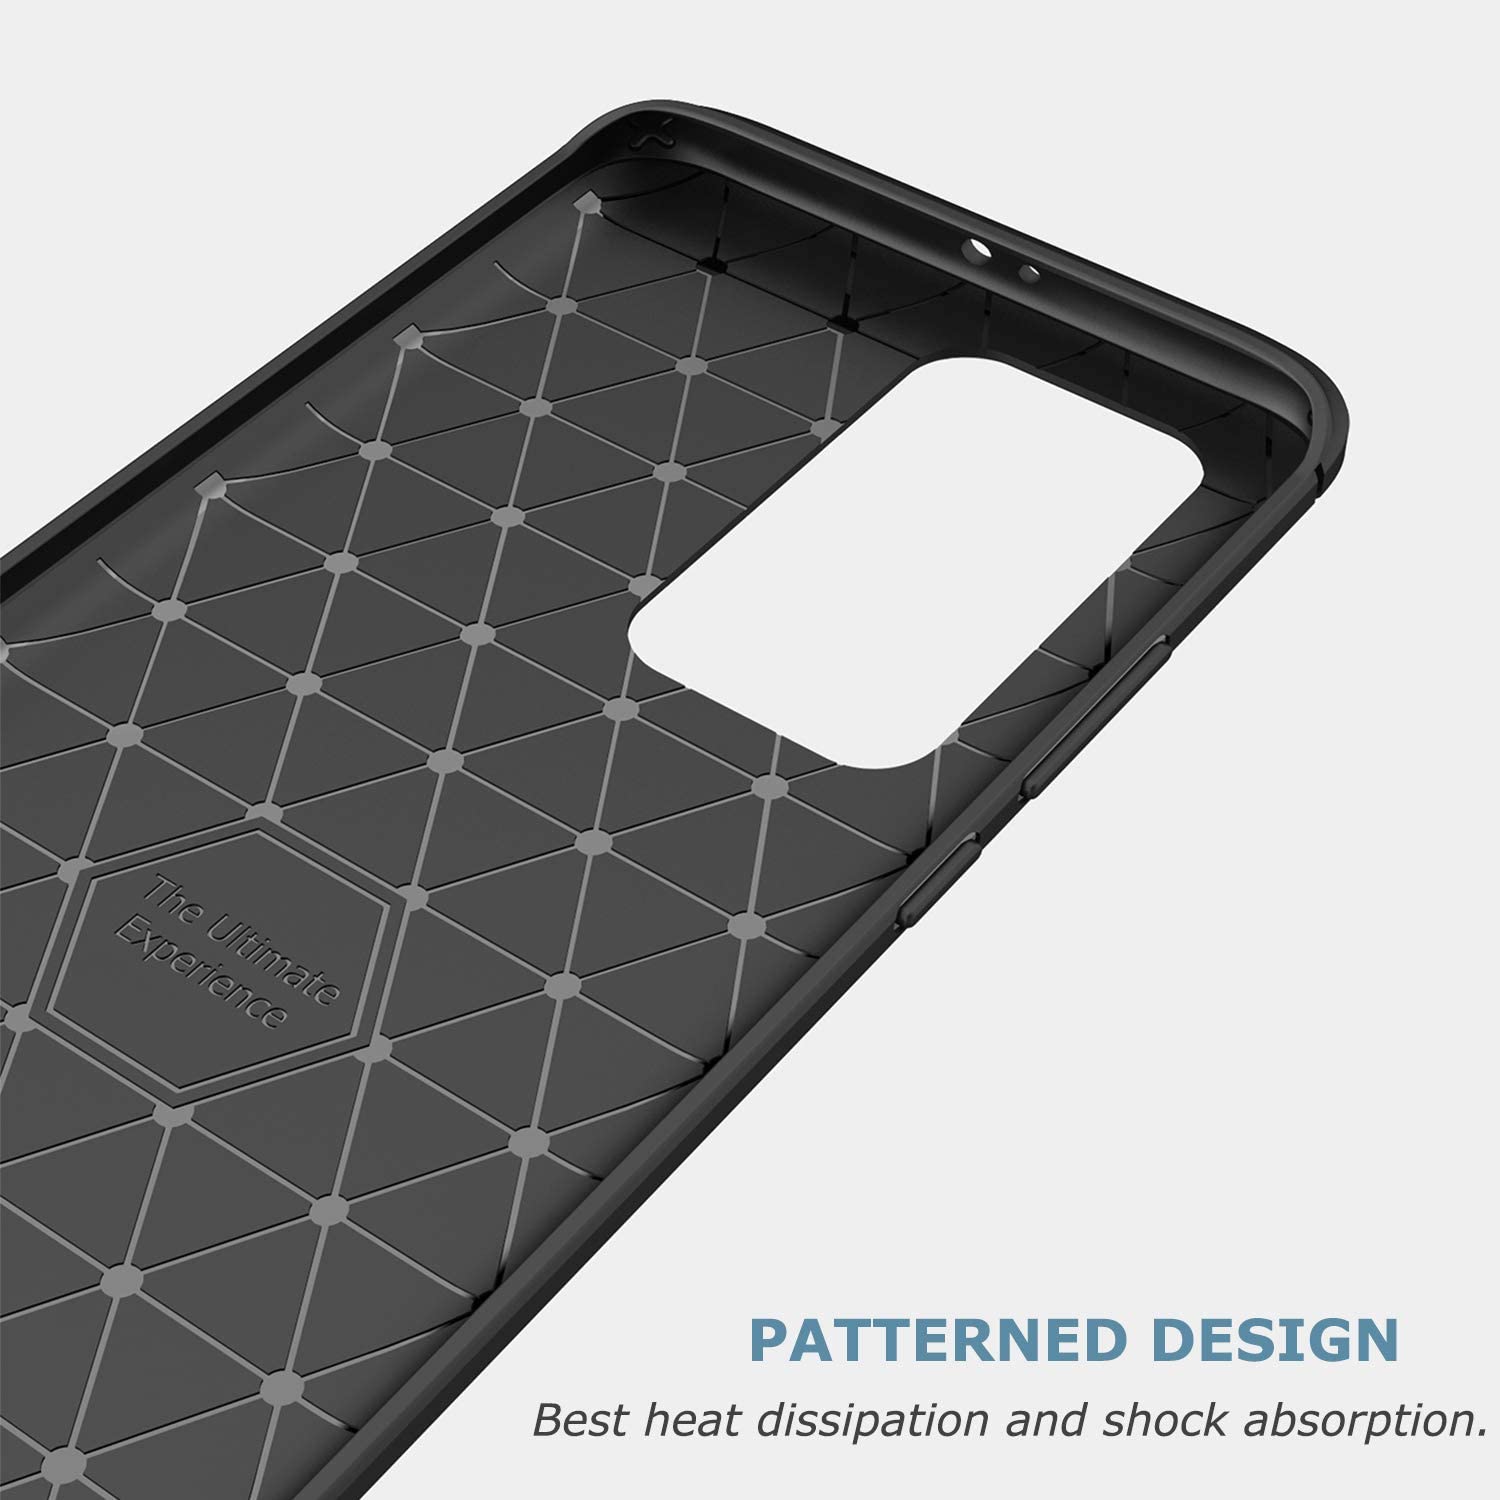 Shockproof Silicone Carbon Fibre Case Cover For Huawei P40 Lite